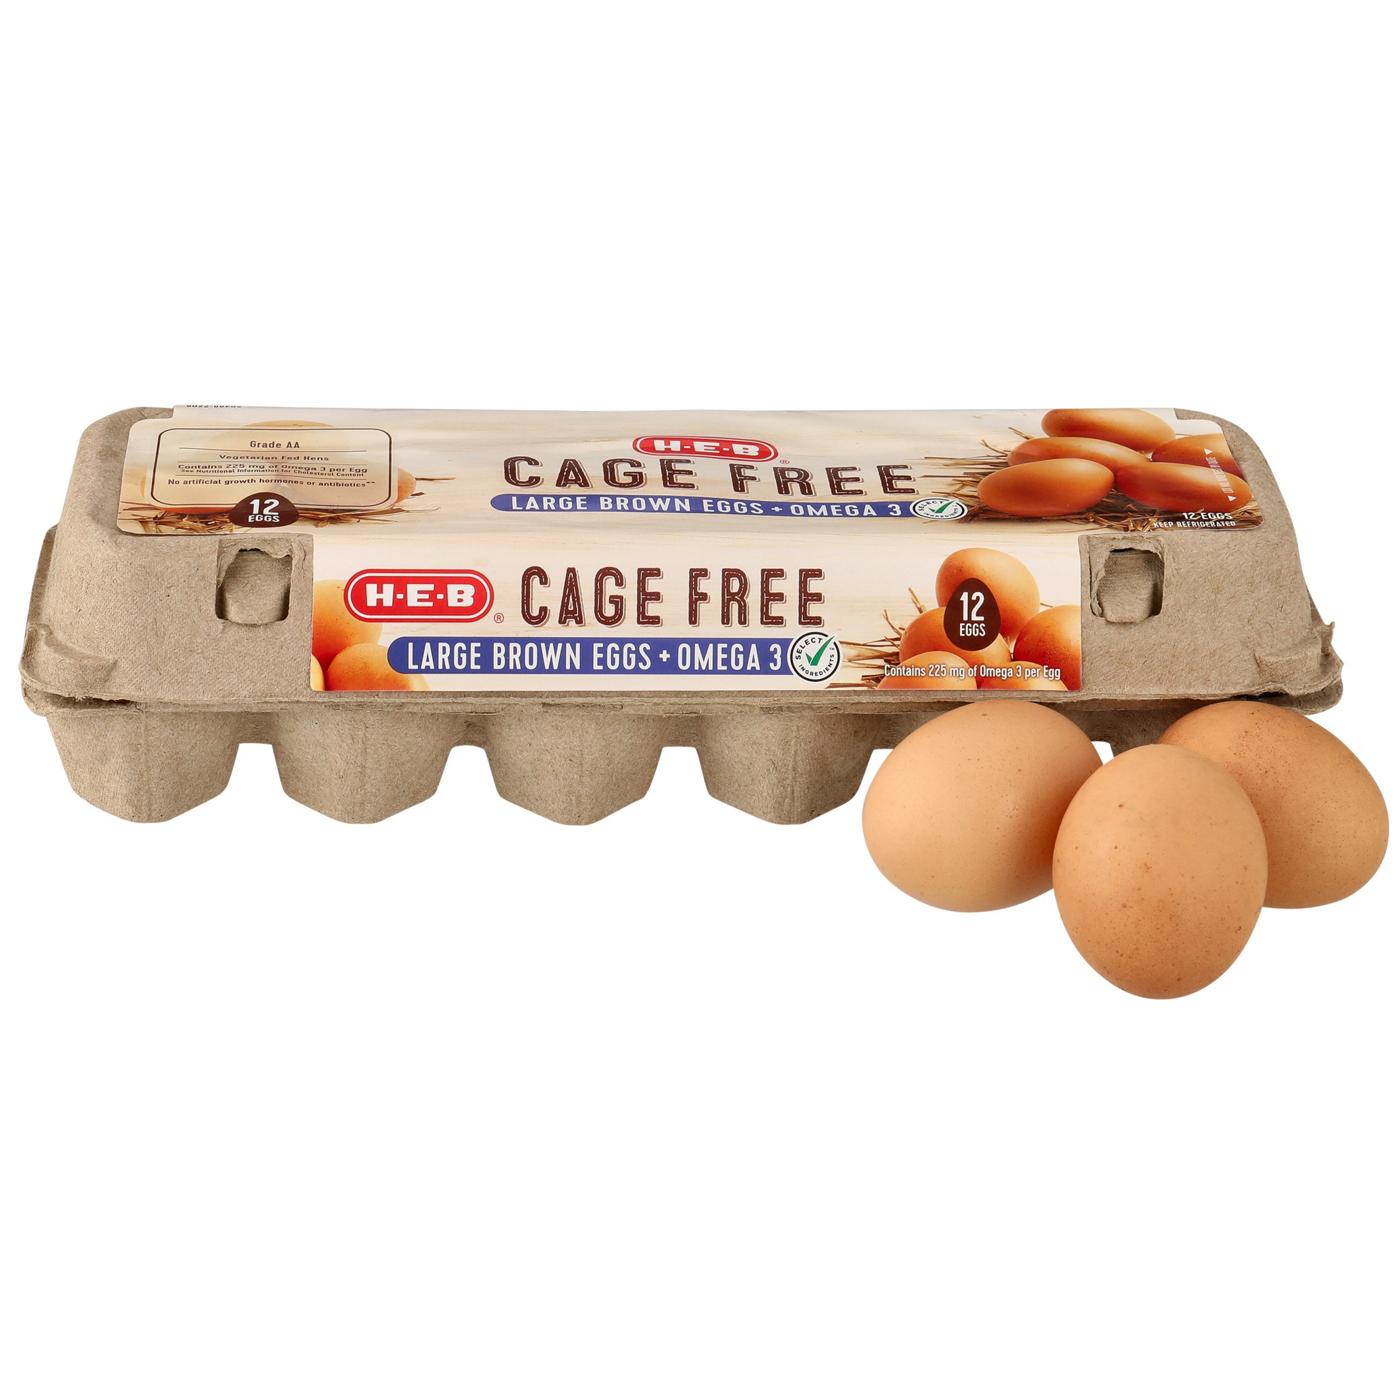 H-E-B Cage Free Omega-3 Grade AA Large Brown Eggs; image 3 of 3